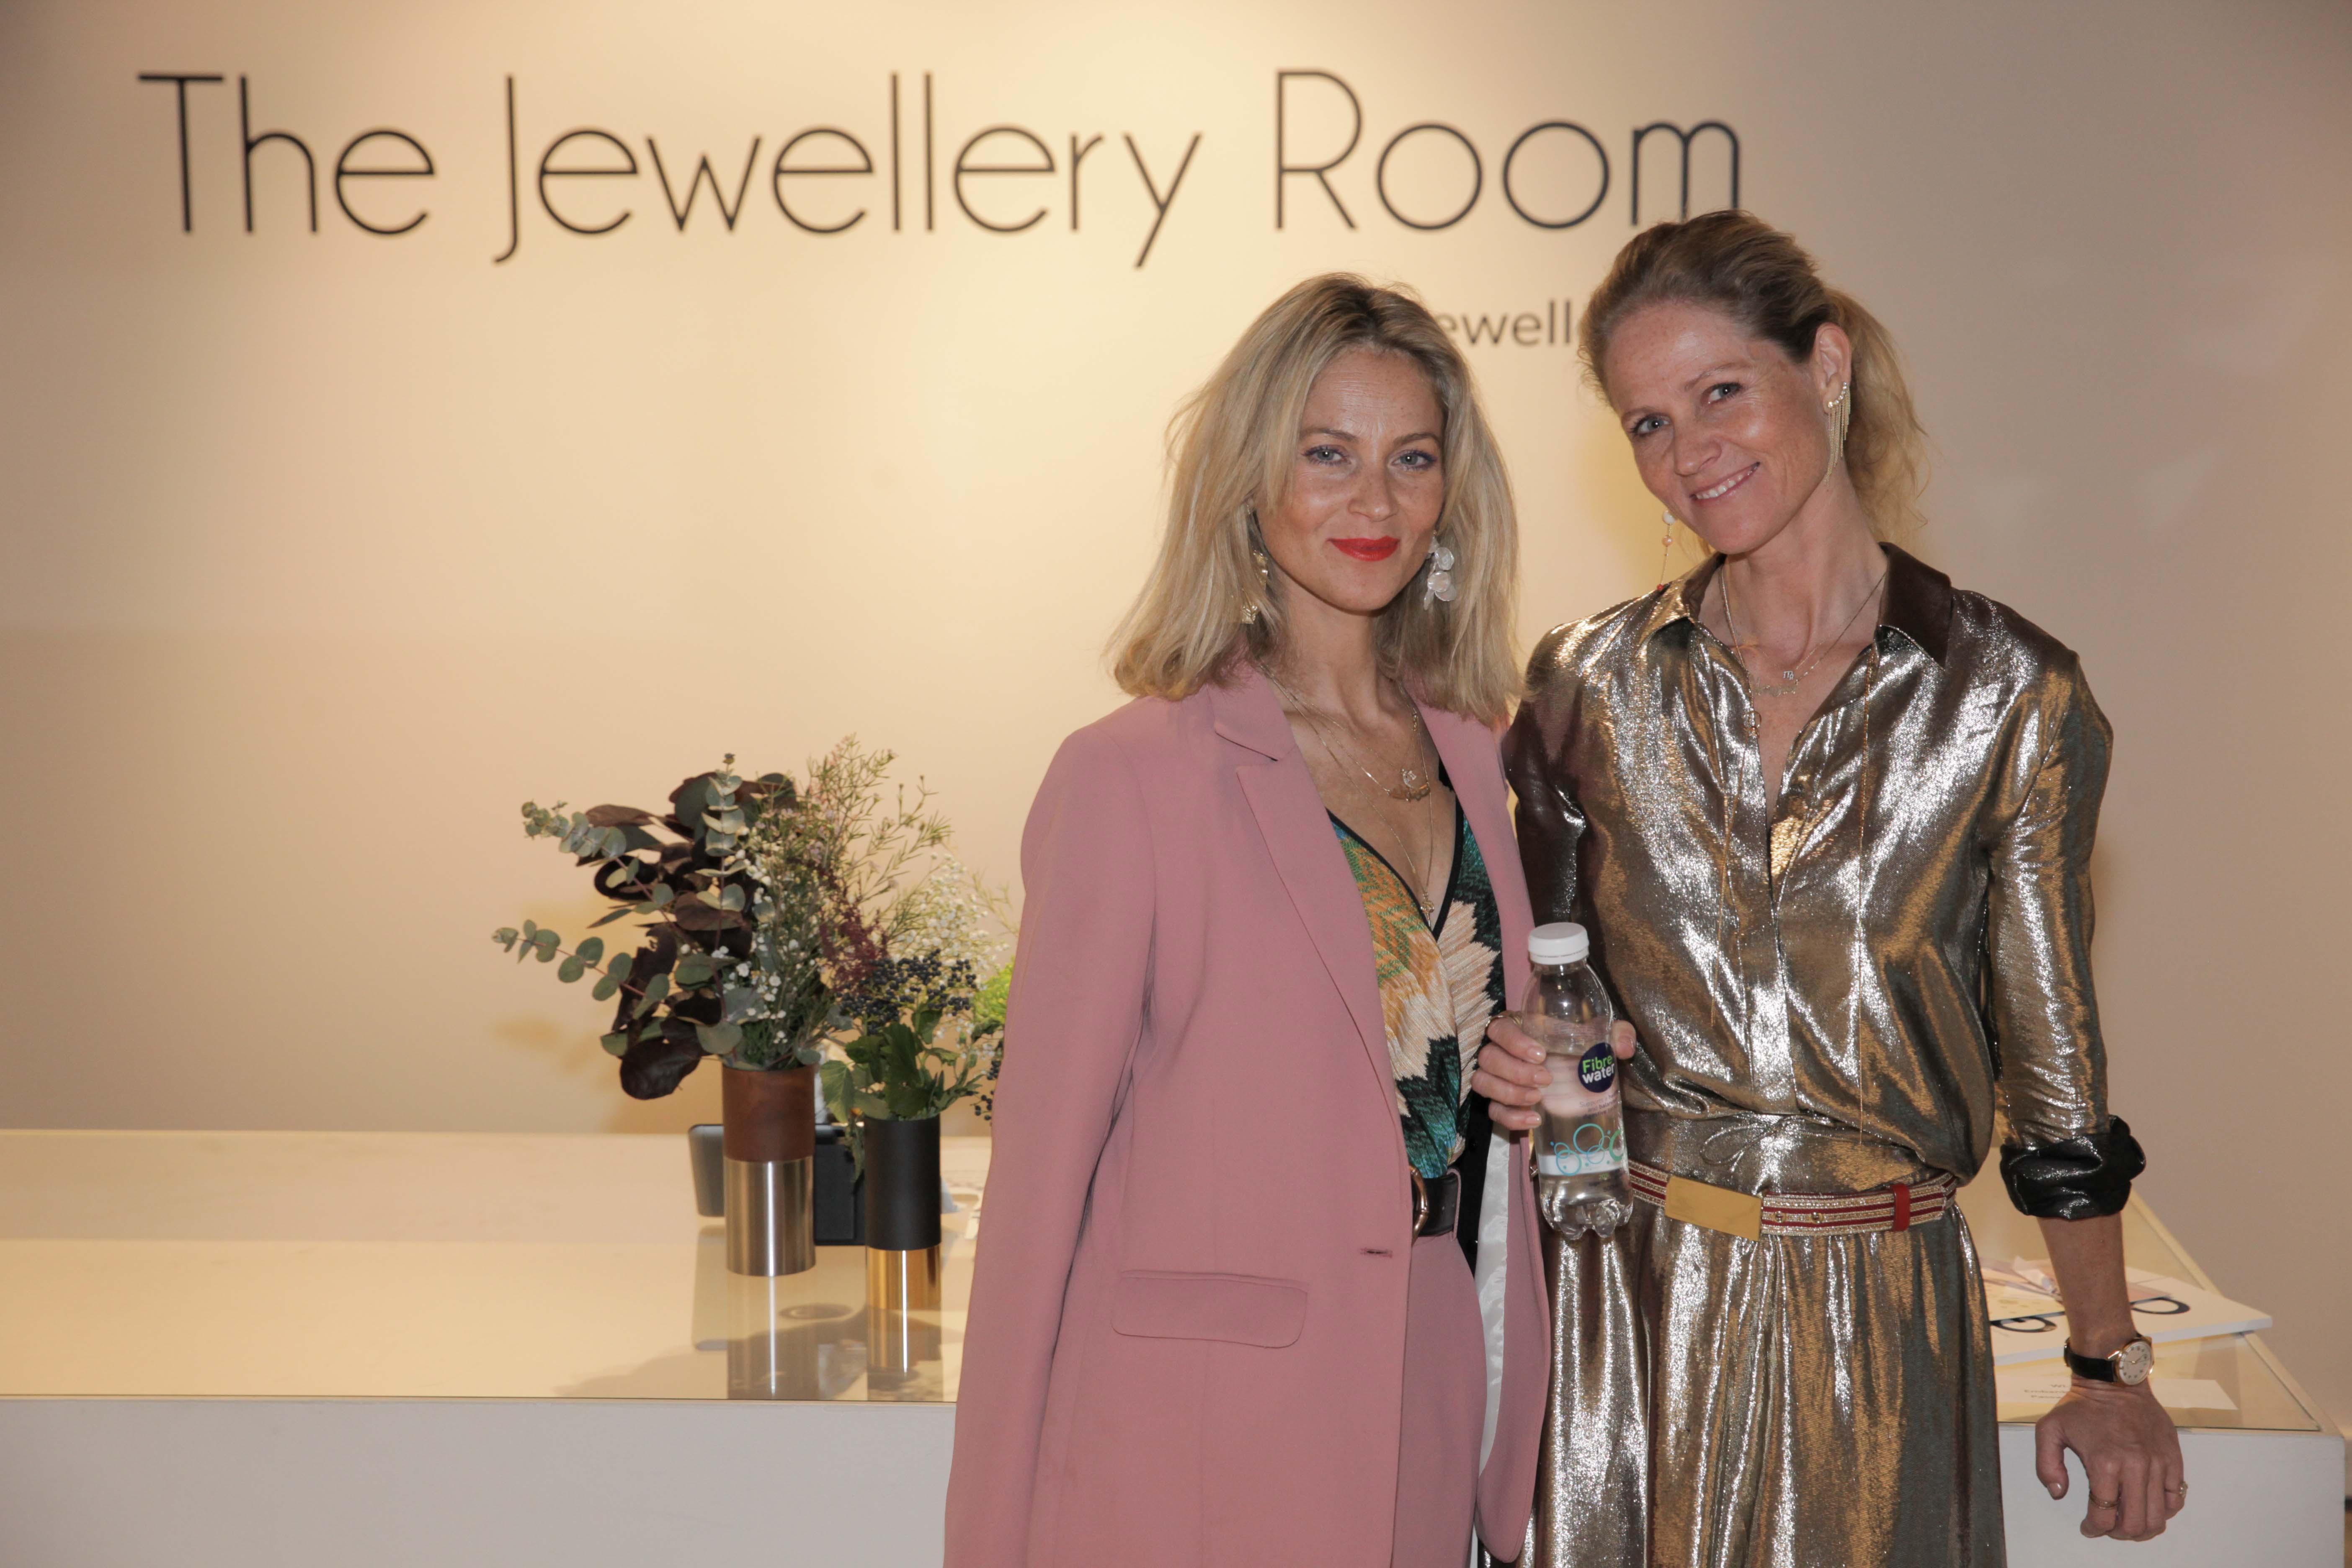 The founders of The Jewellery Room